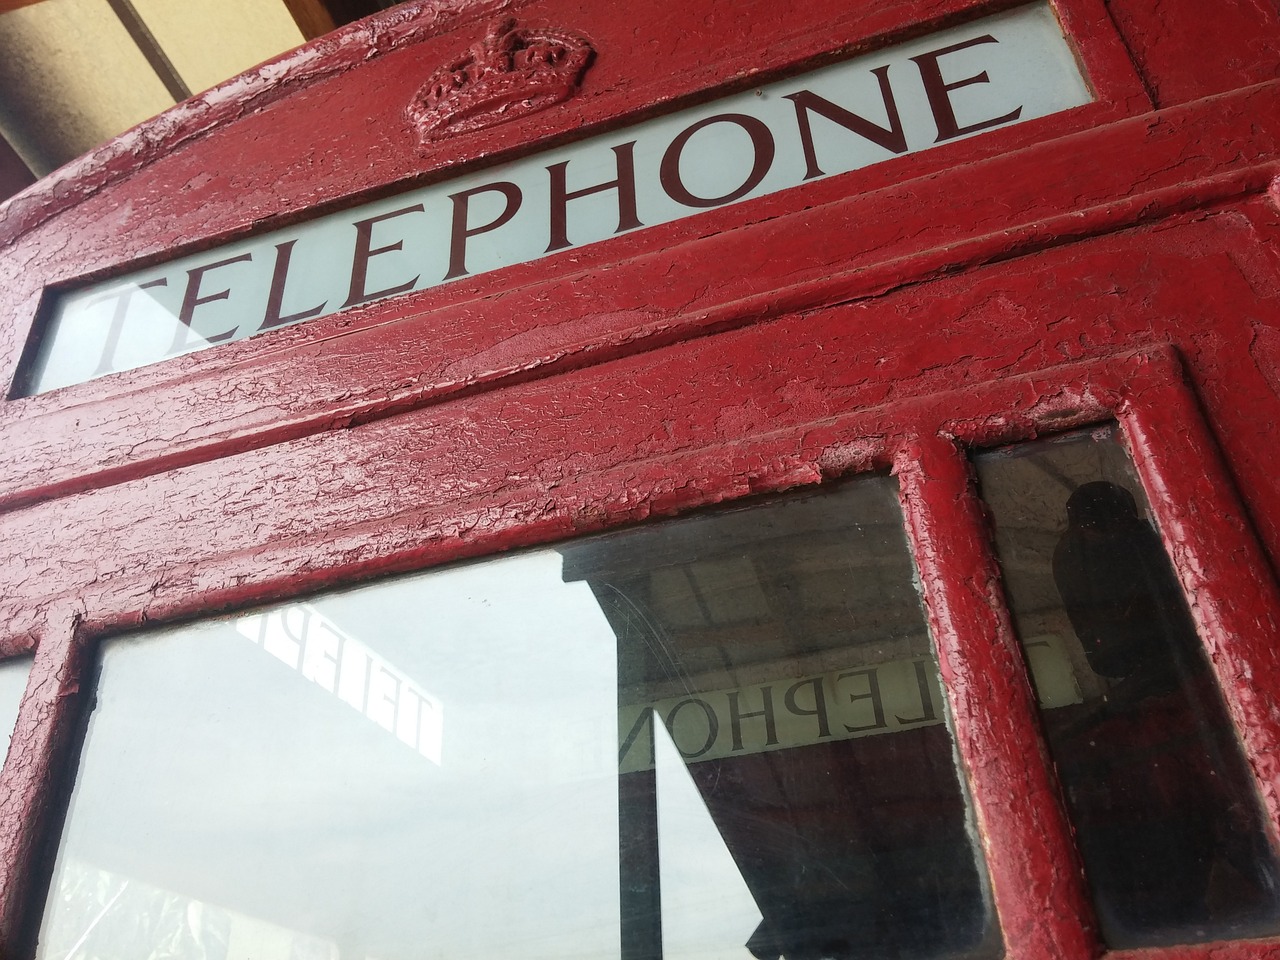 telephone booth red free photo